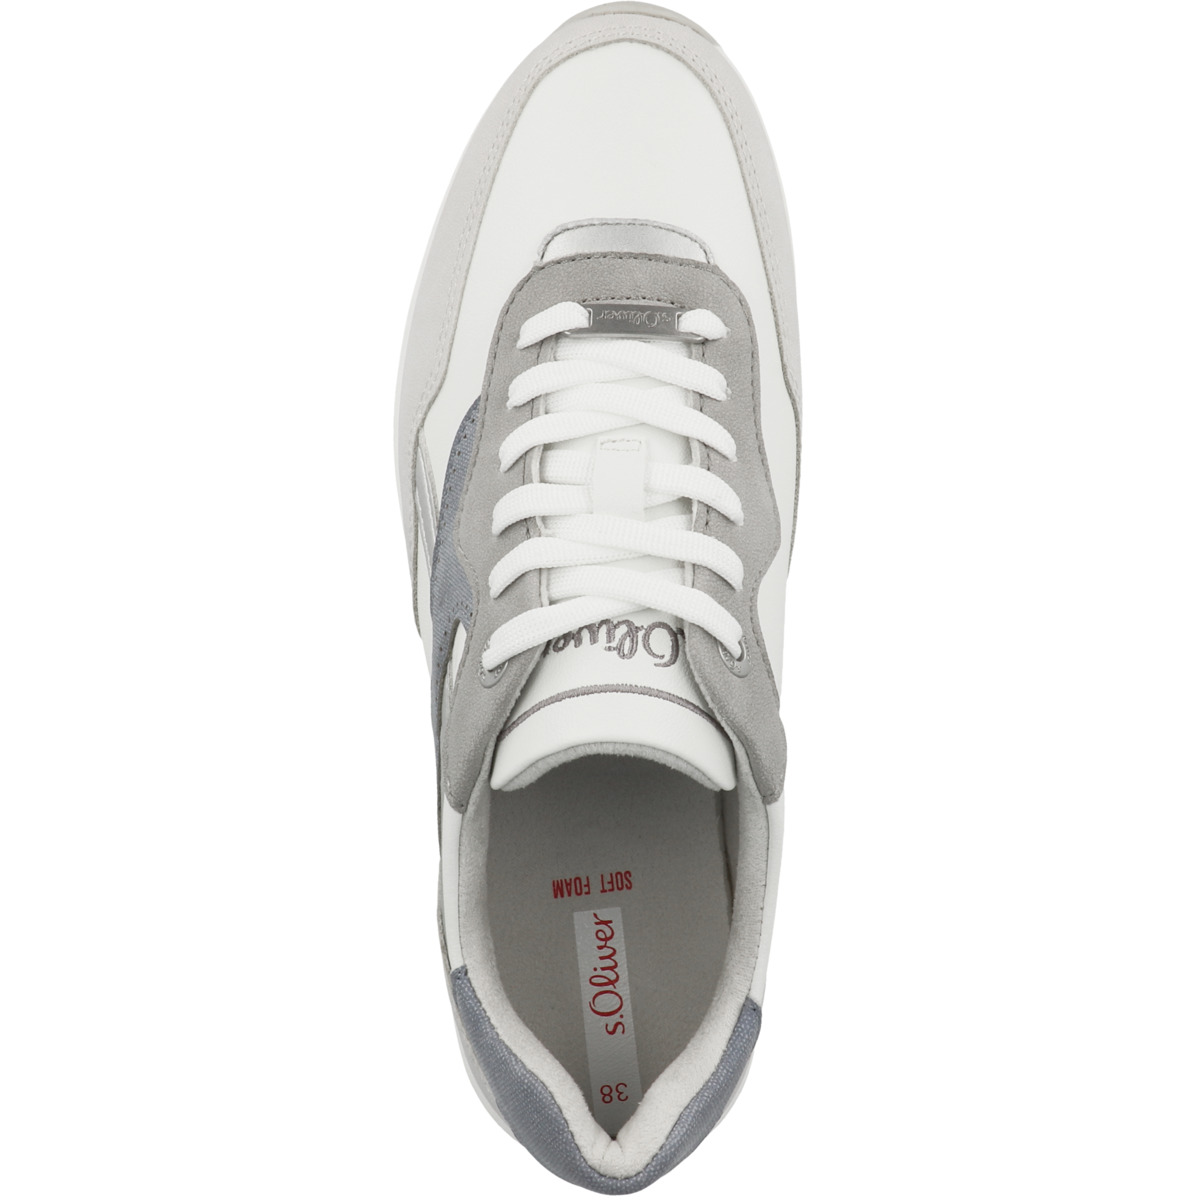 s.Oliver 5-23661-20 Sneaker low weiss